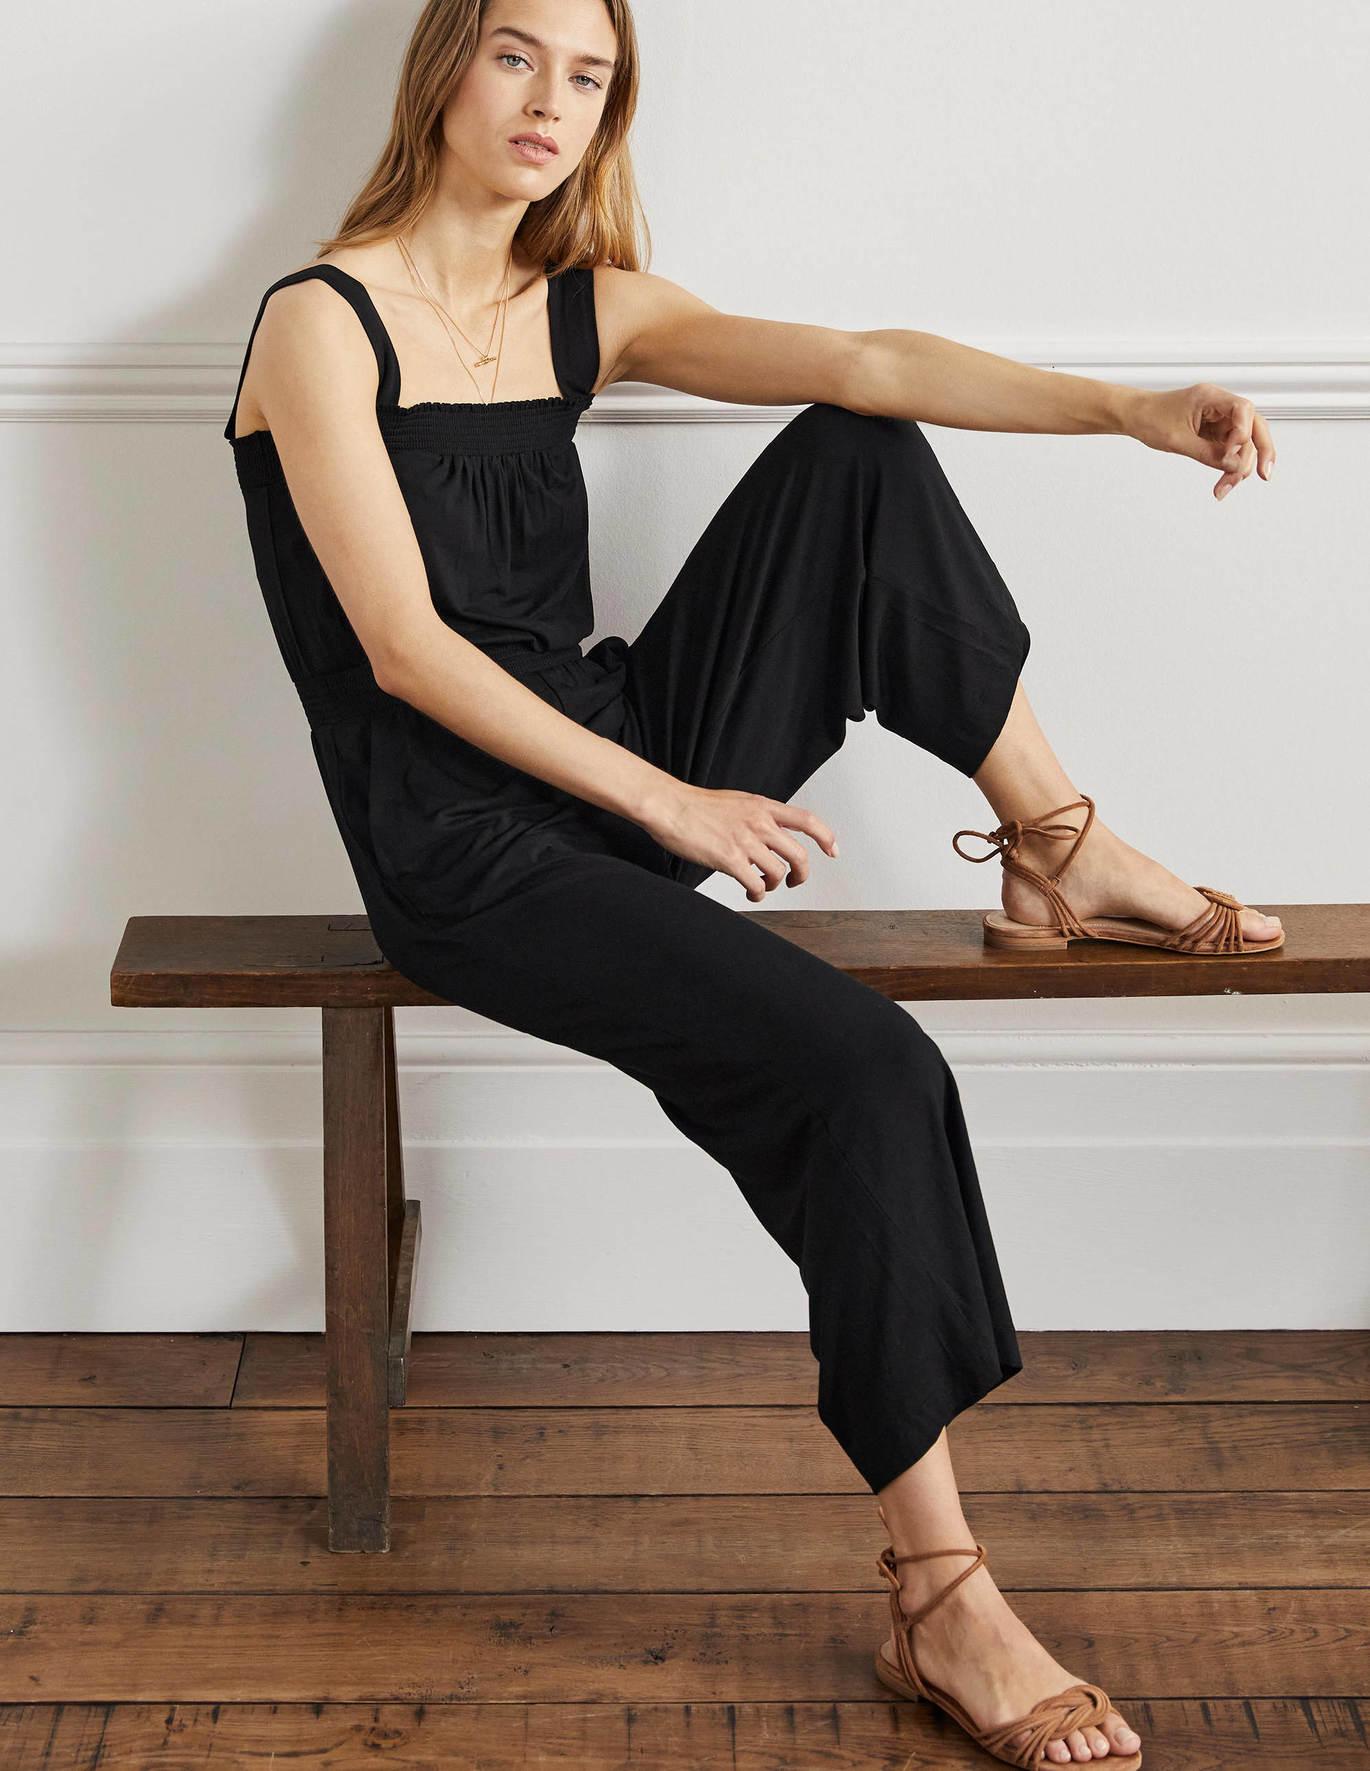 13 Casual Jumpsuits for Women To Wear for Errands, Traveling & More!